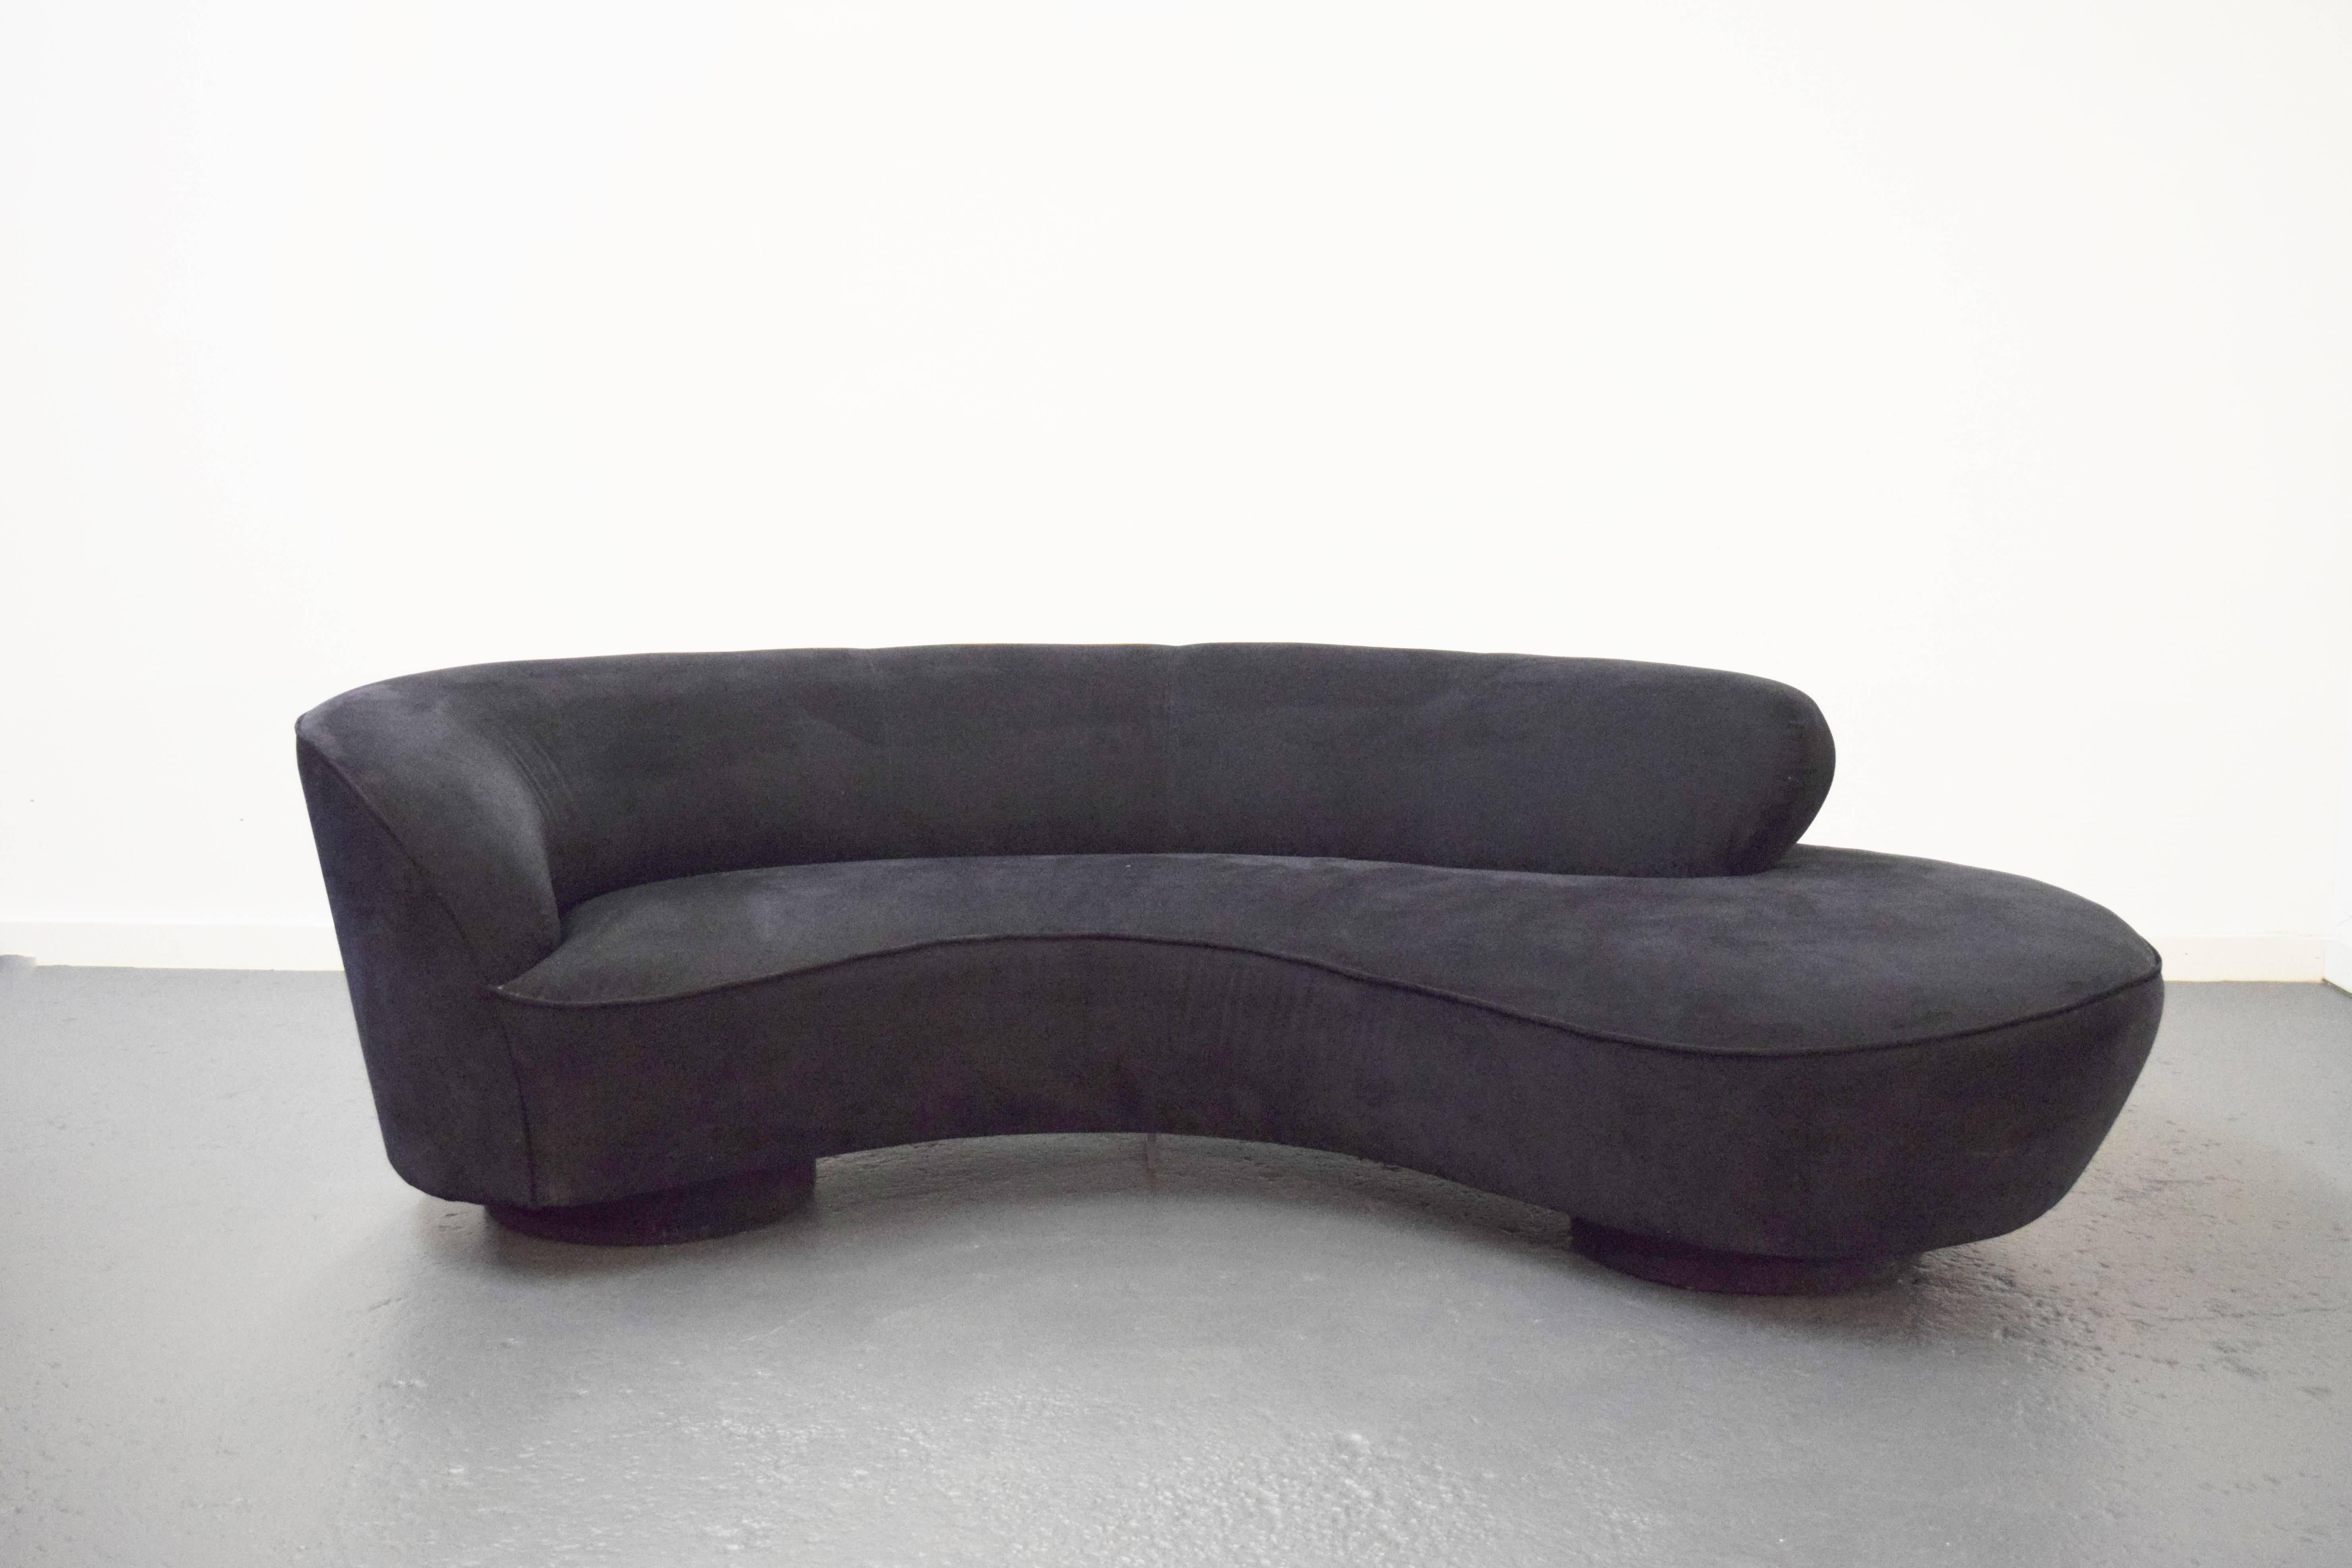 Vladimir Kagan Serpentine sofa for Directional. Sofa has center Lucite support and retains Directional labels.